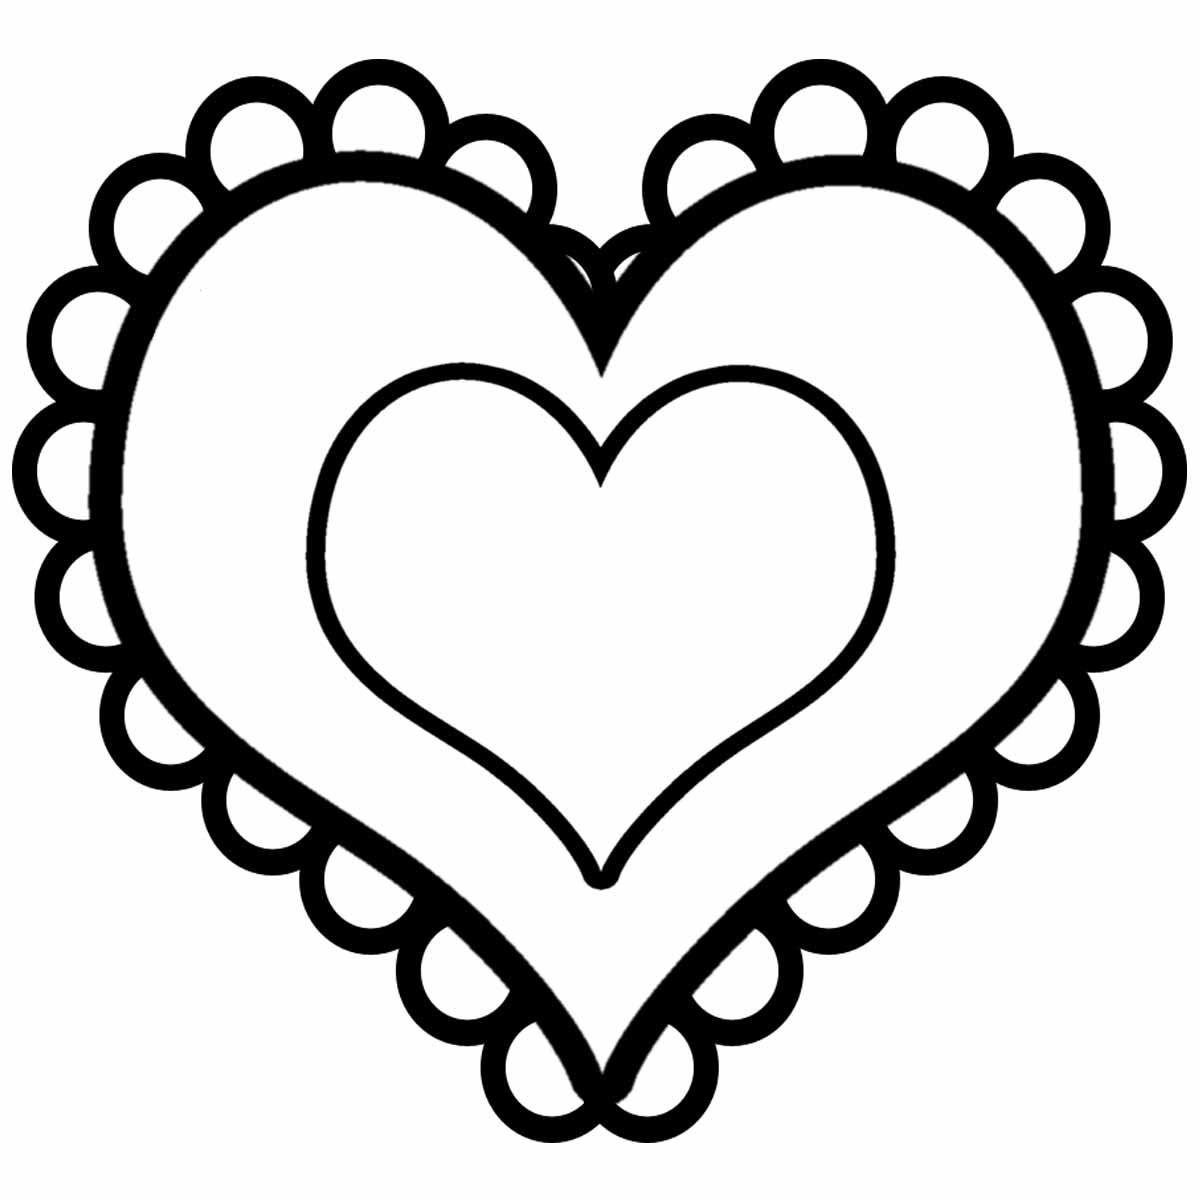 Pink Heart Outline Clipart   Clipart Panda   Free Clipart Images